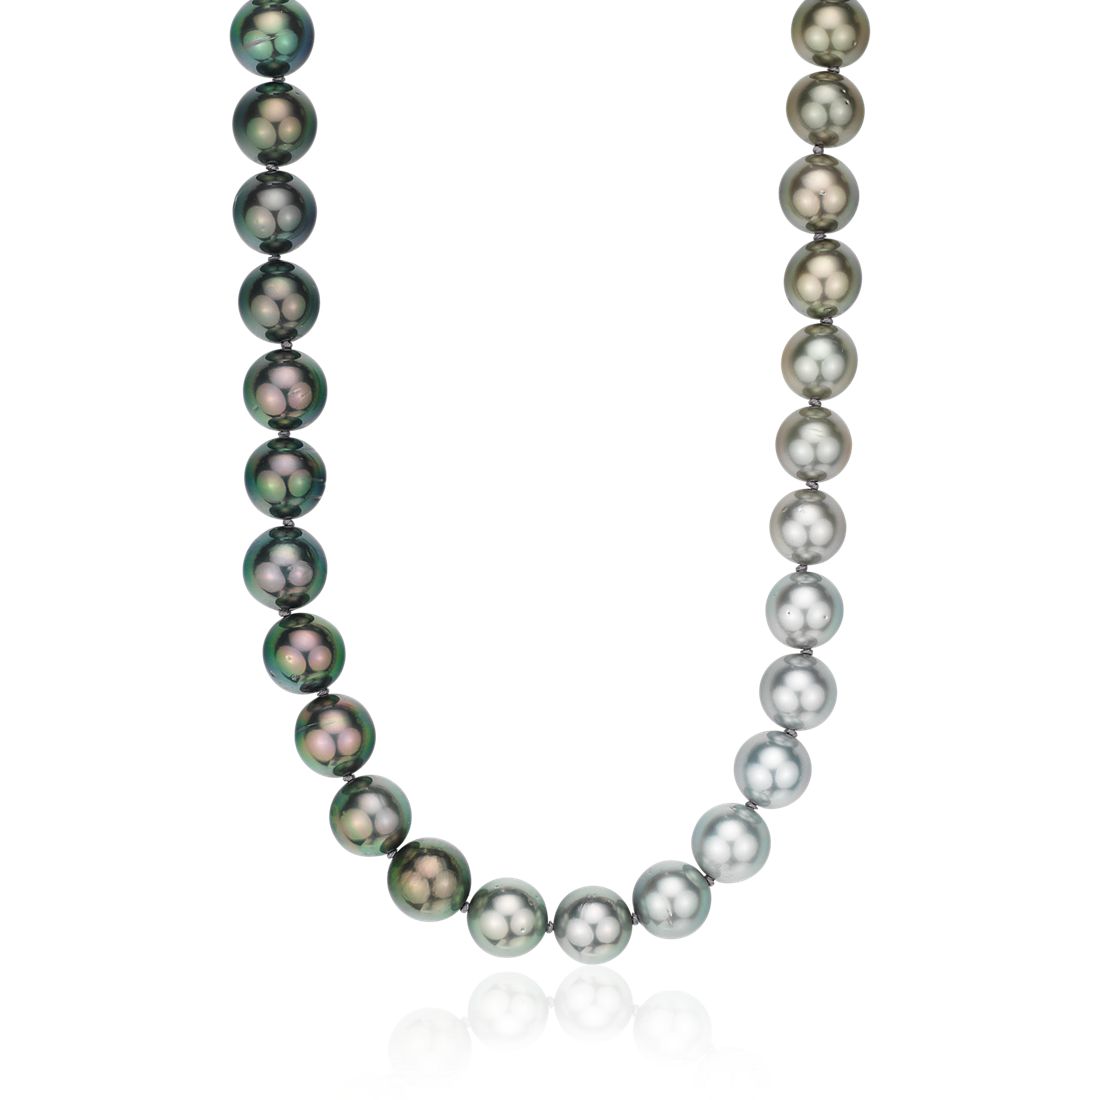 Gradient Tahitian Cultured Pearl Strand in 18k White Gold - 39.5" Long (9-10mm)